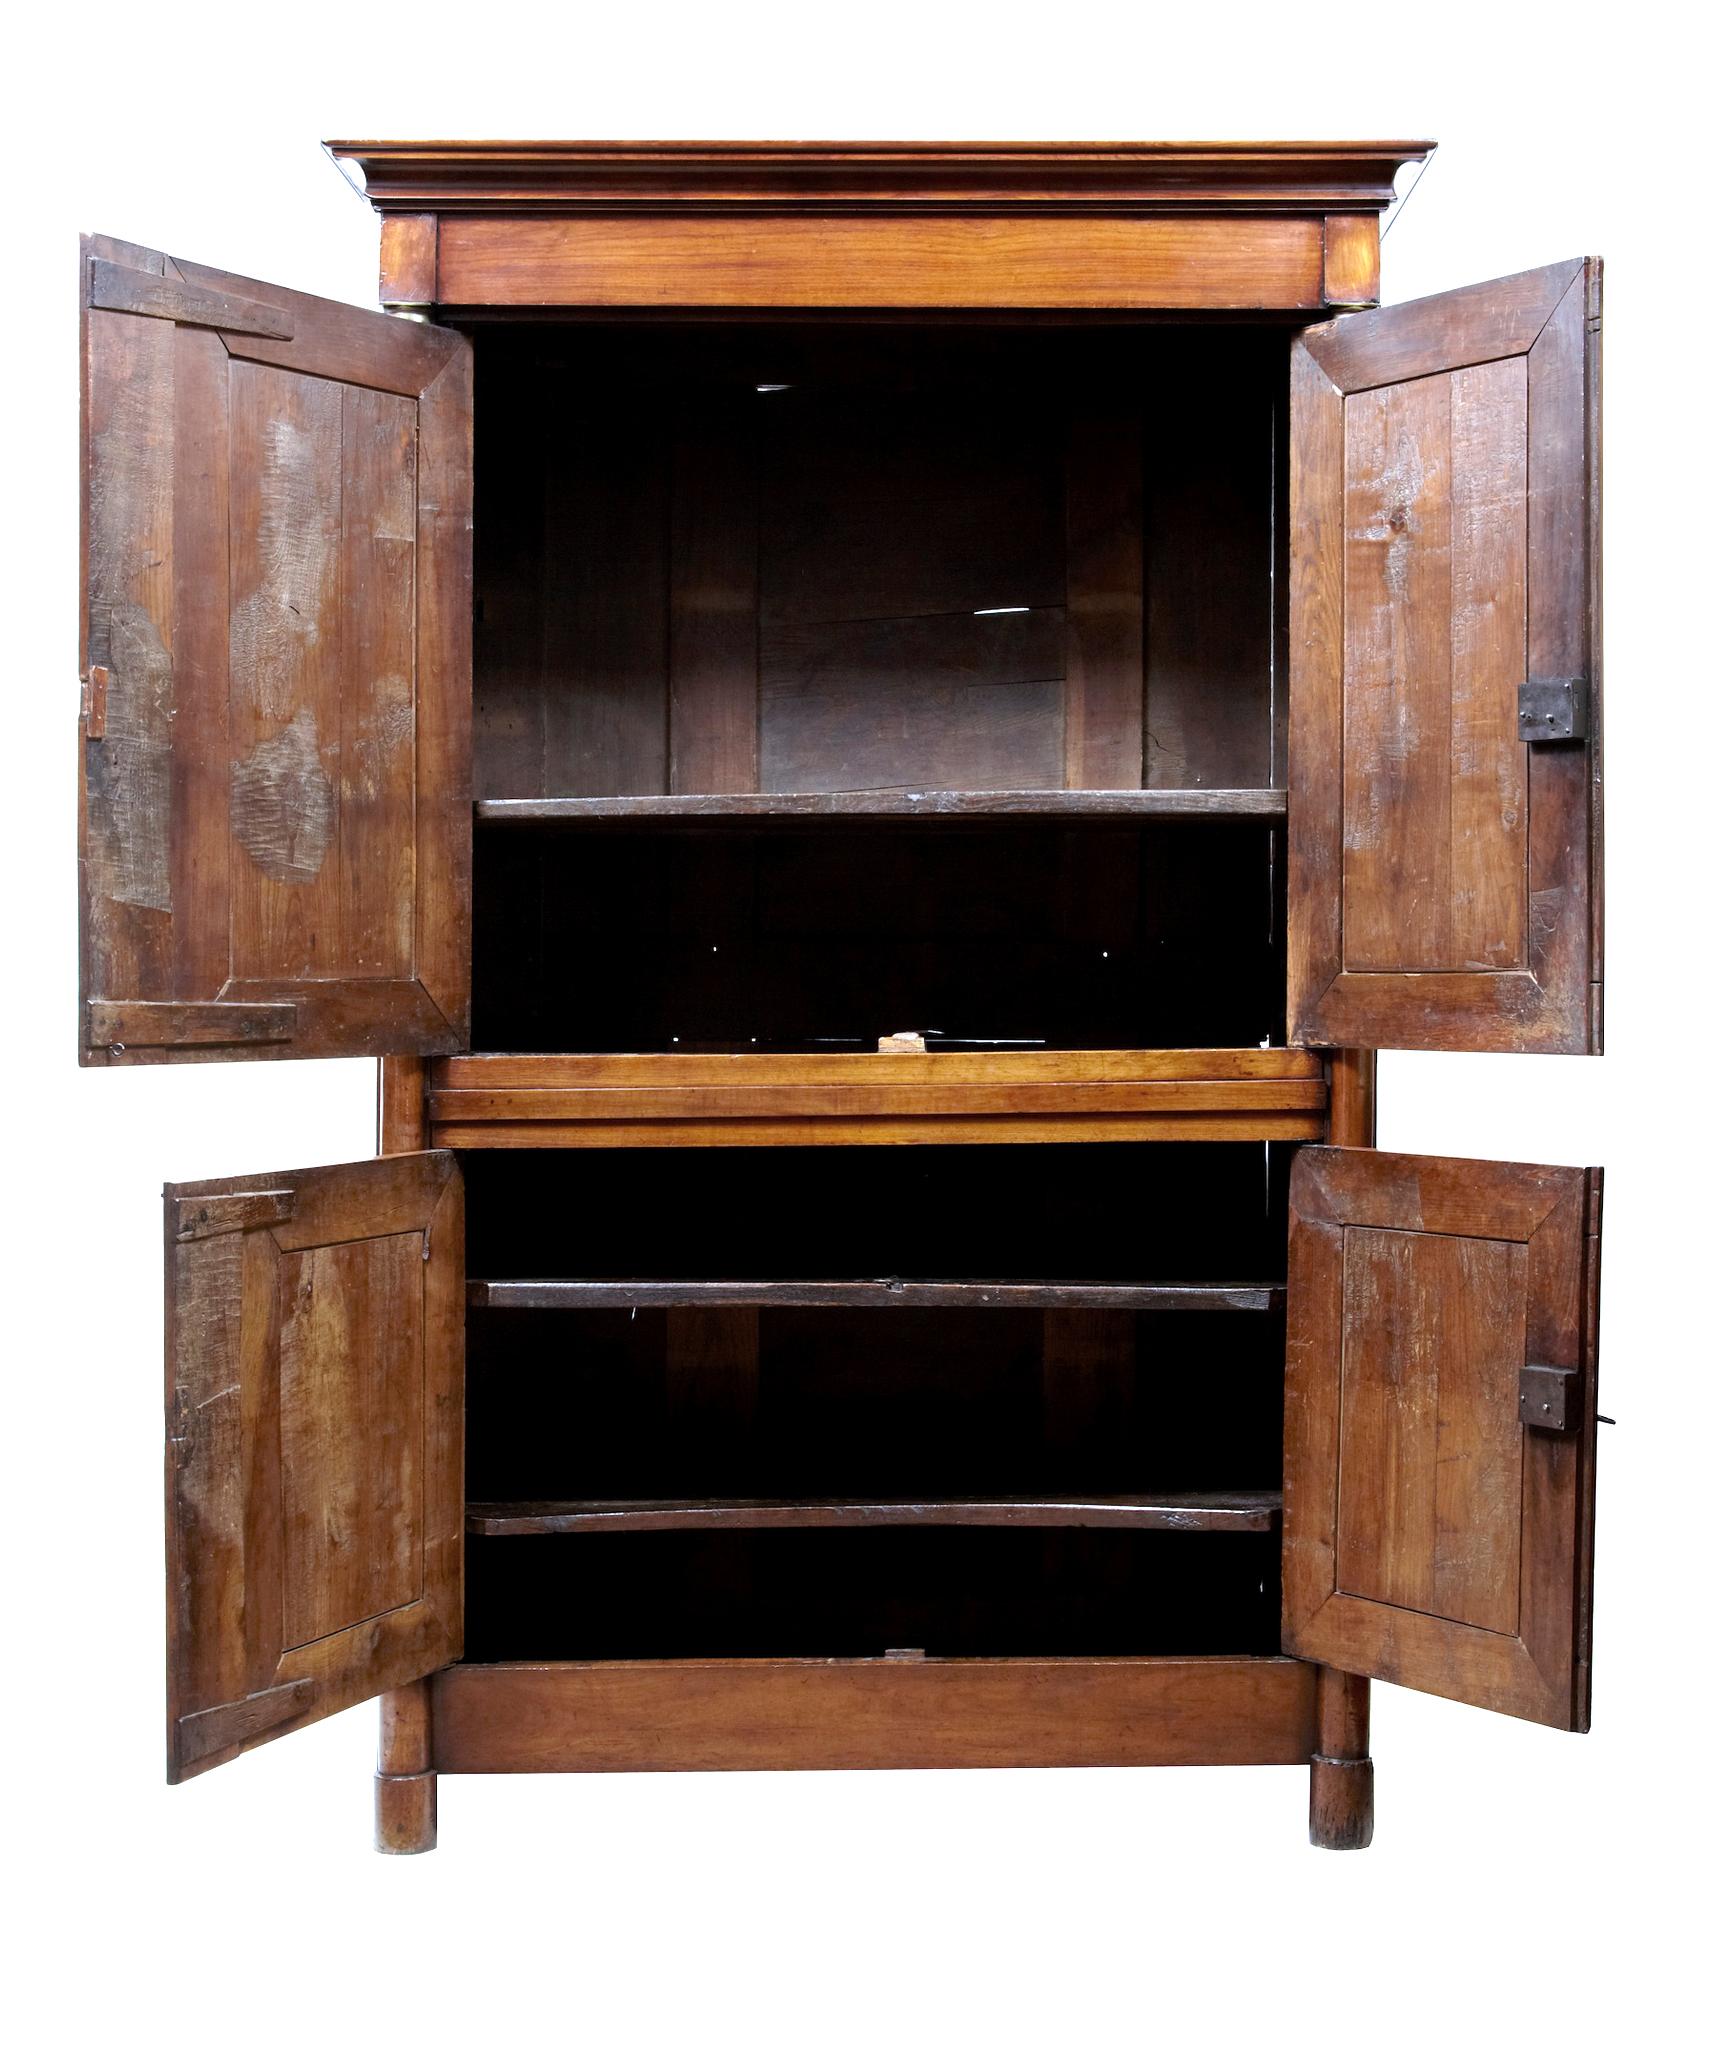 19th century French empire fruitwood armoire cupboard circa 1810.

Made in 1 piece and of grand proportions. Shaped cornice with 2 double door cupboards below. Upper cupboard opens to a single shelf and area that lends its self perfectly to